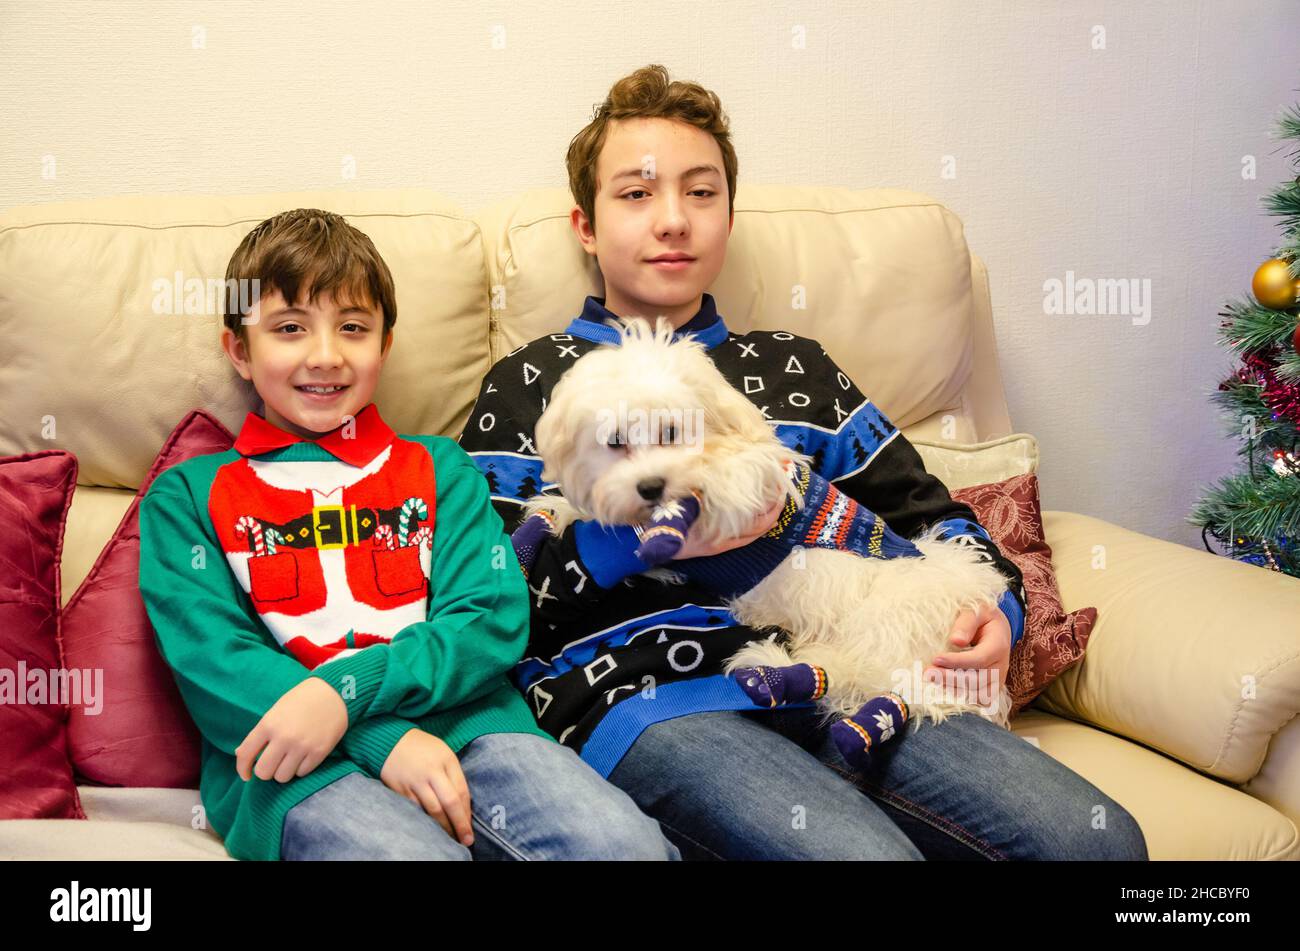 Brothers sit together on a setter on Christmas day and cuddle their small white cavapoo dog. They wear Christmas jumpers. Stock Photo